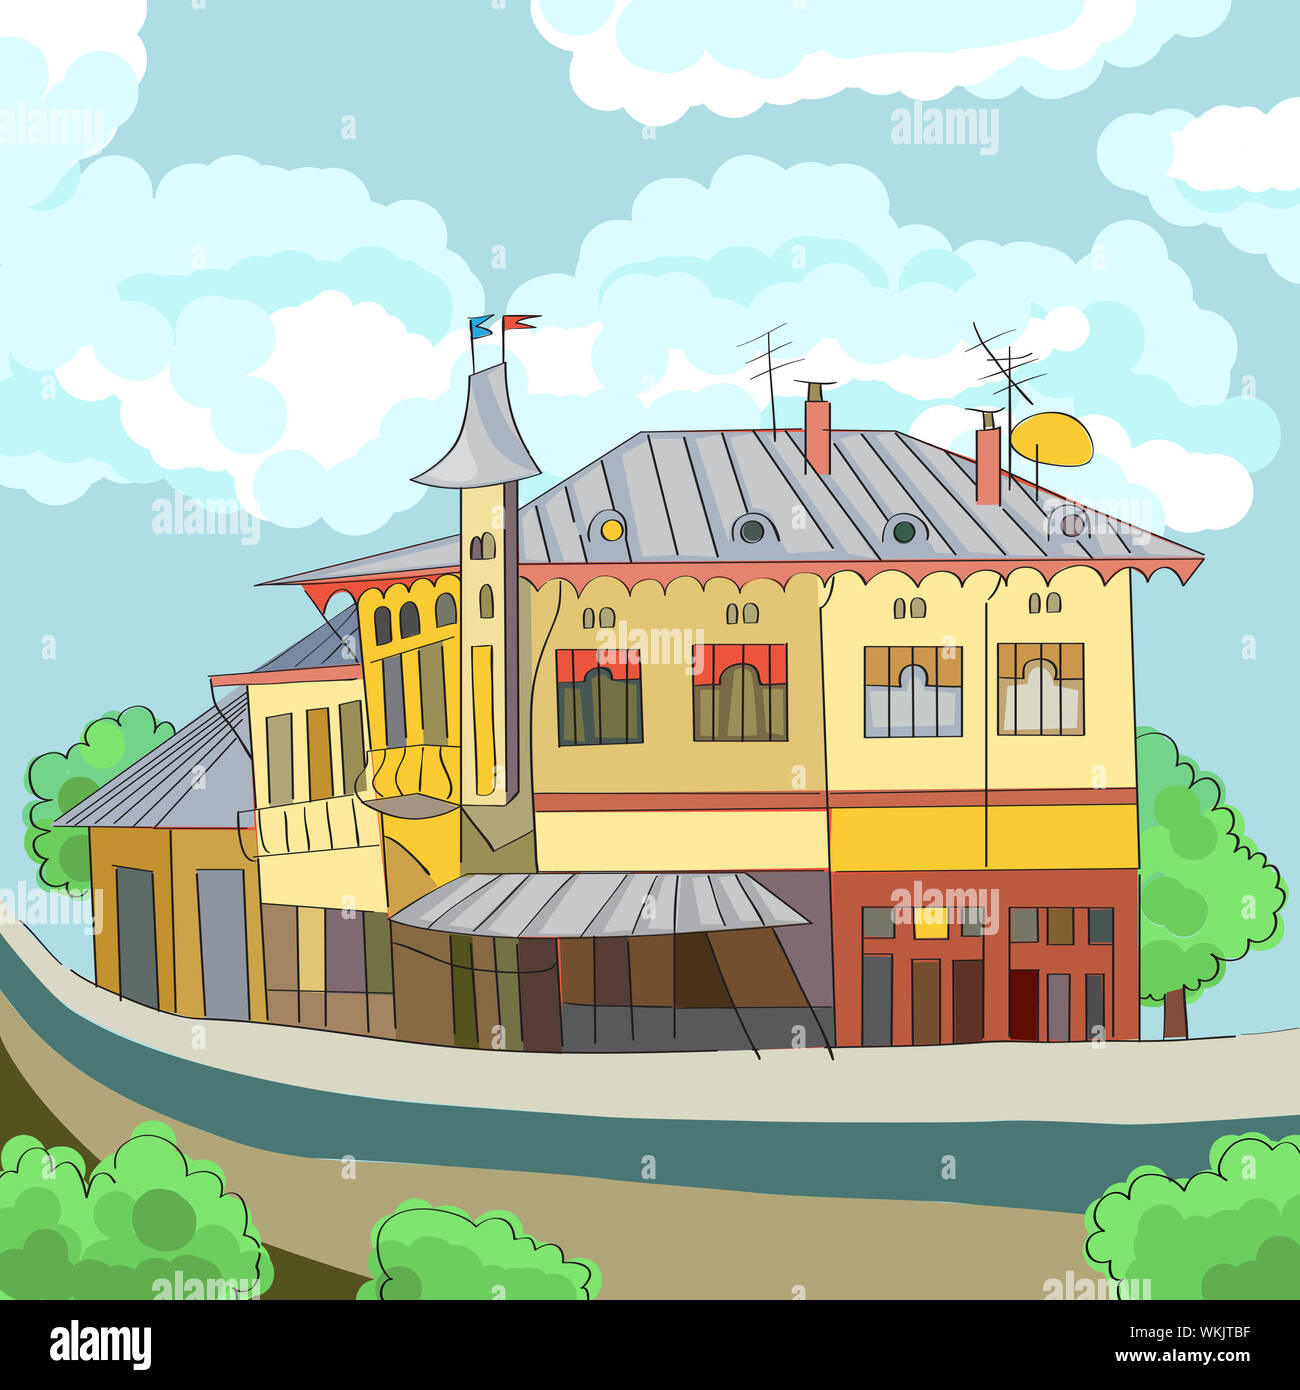 Hand drawn illustration of a balkanic building with tower and flags, urban landscape with cloudy sky Stock Photo